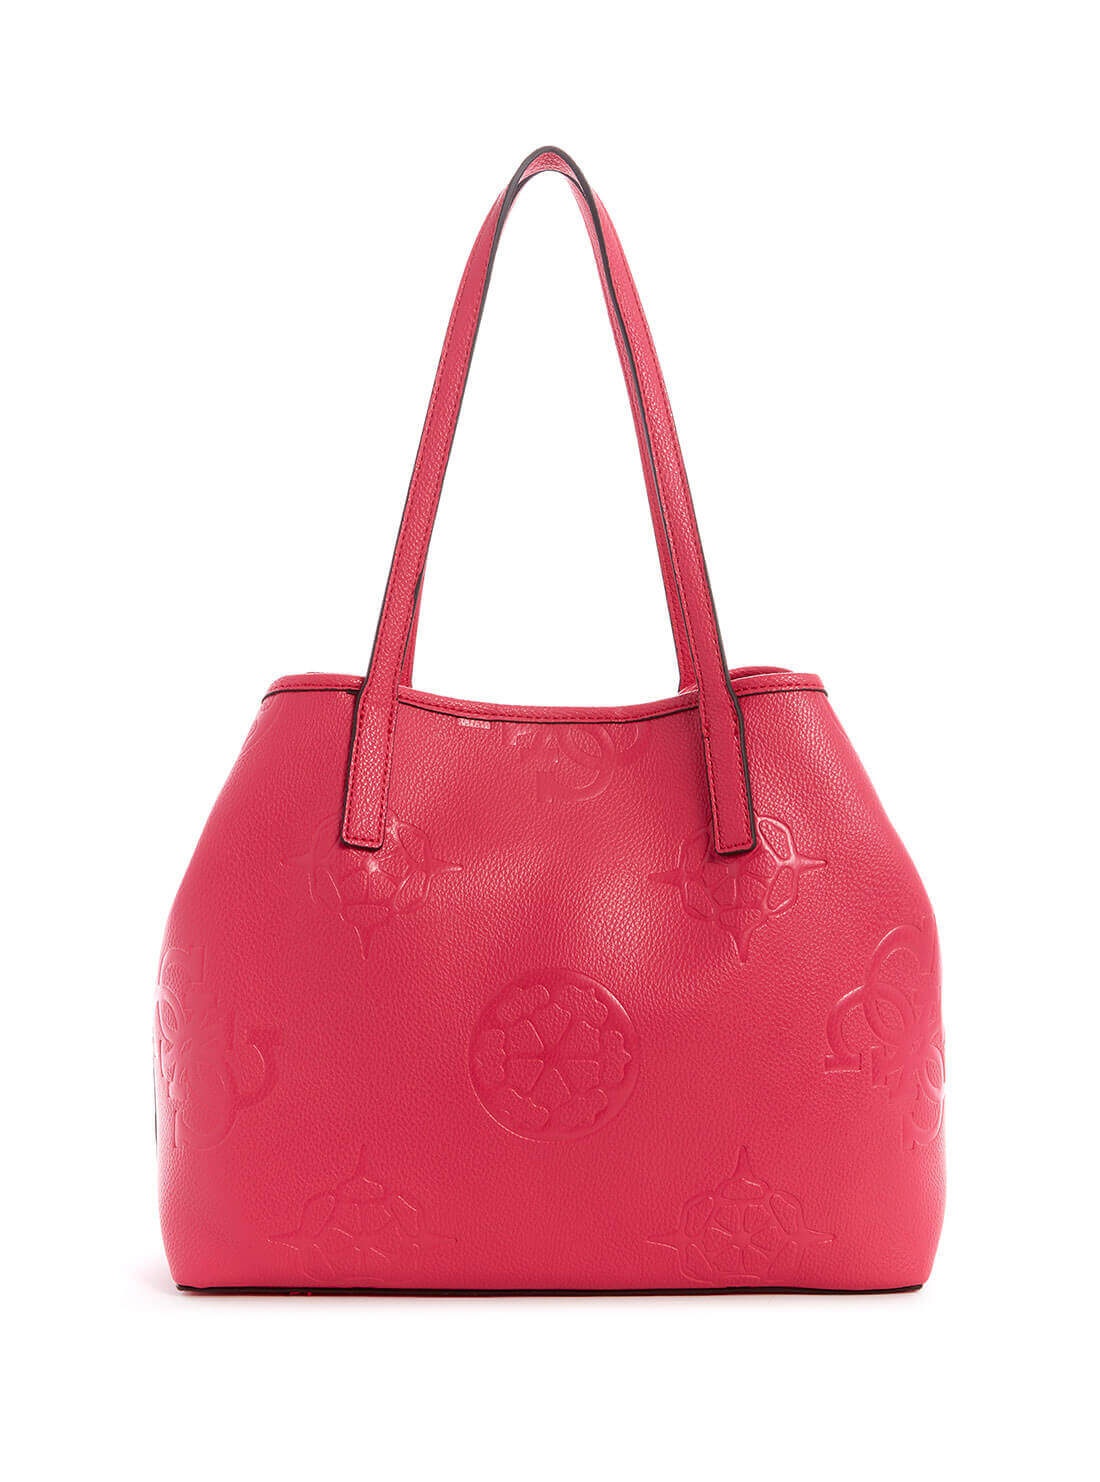 GUESS Women's Pink Vikky Tote Bag DP699523 Back View